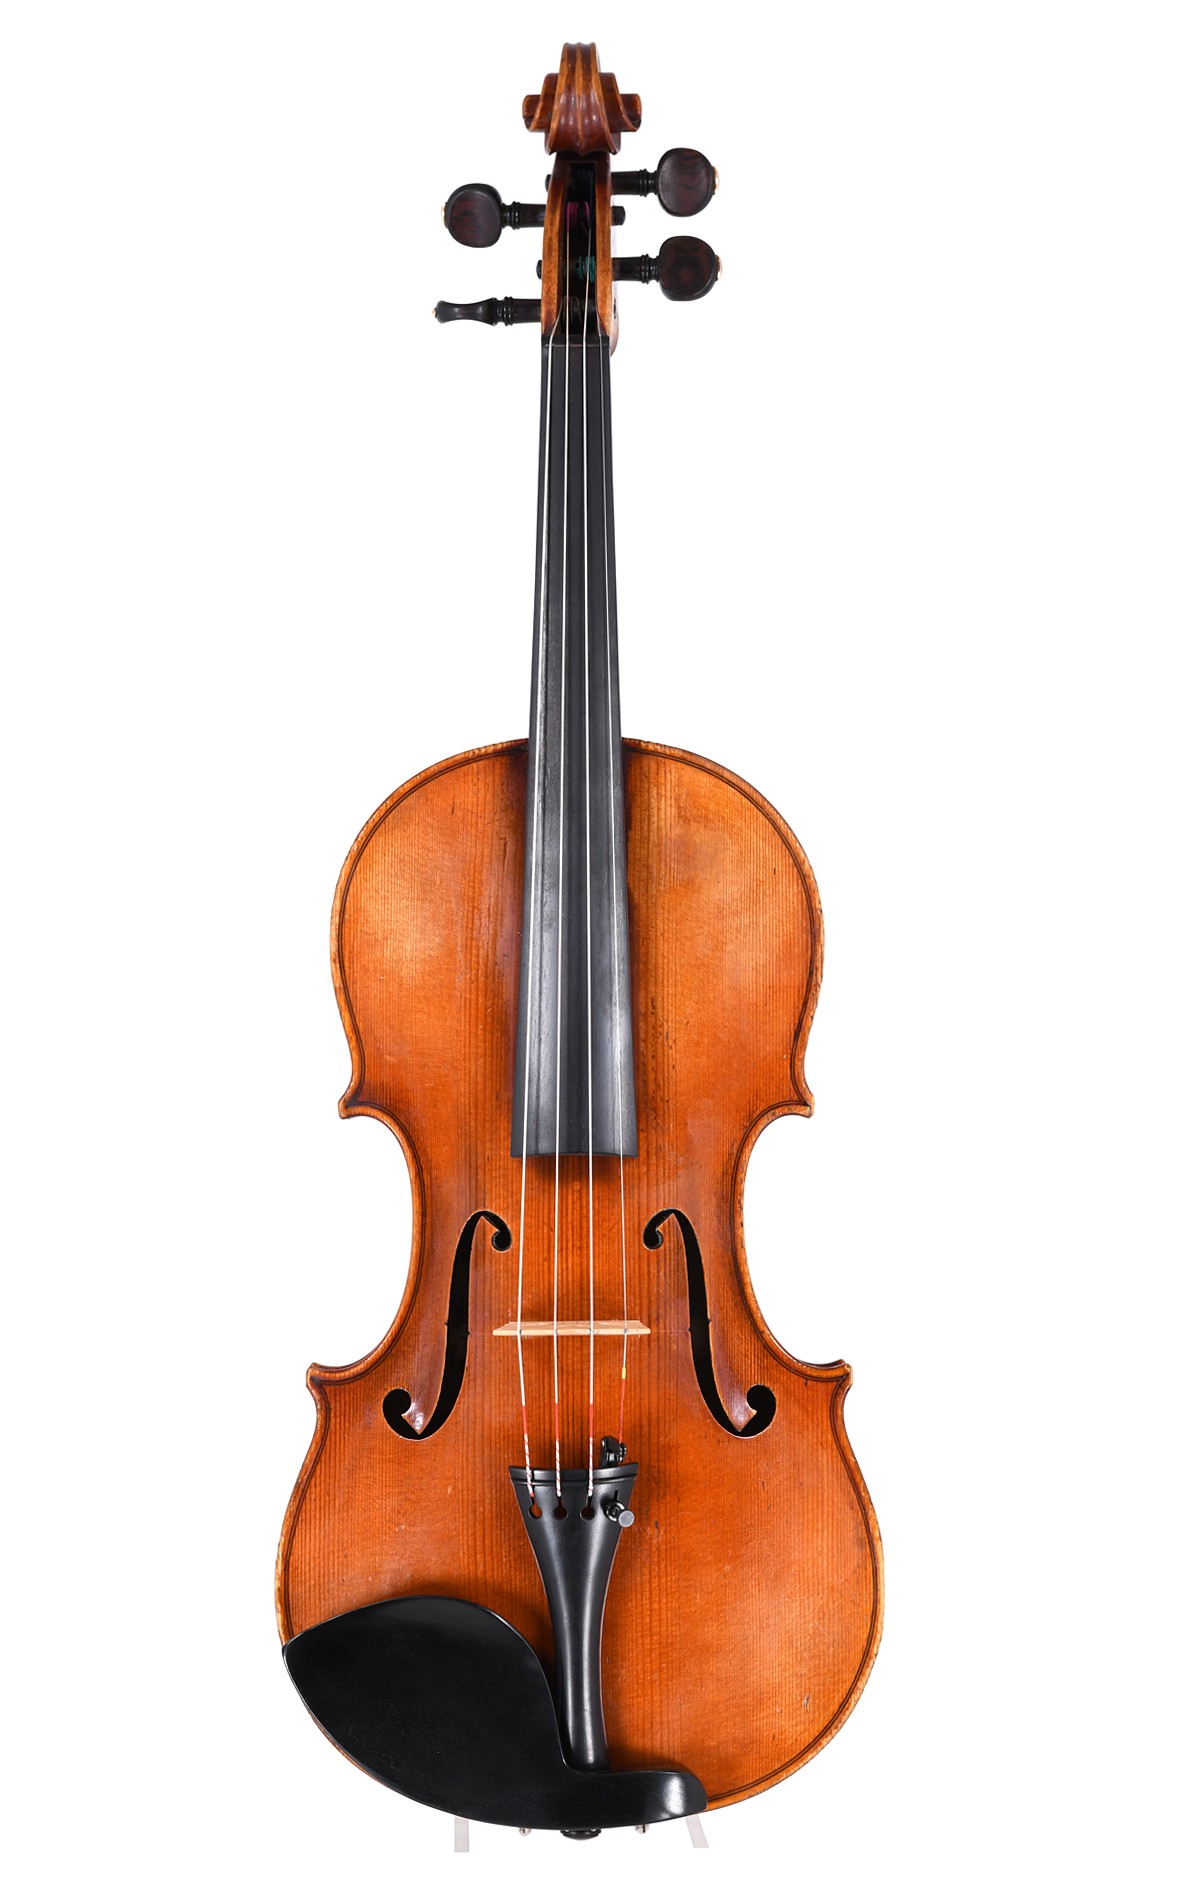 Georges Apparut violin, spruce top, made in 1934